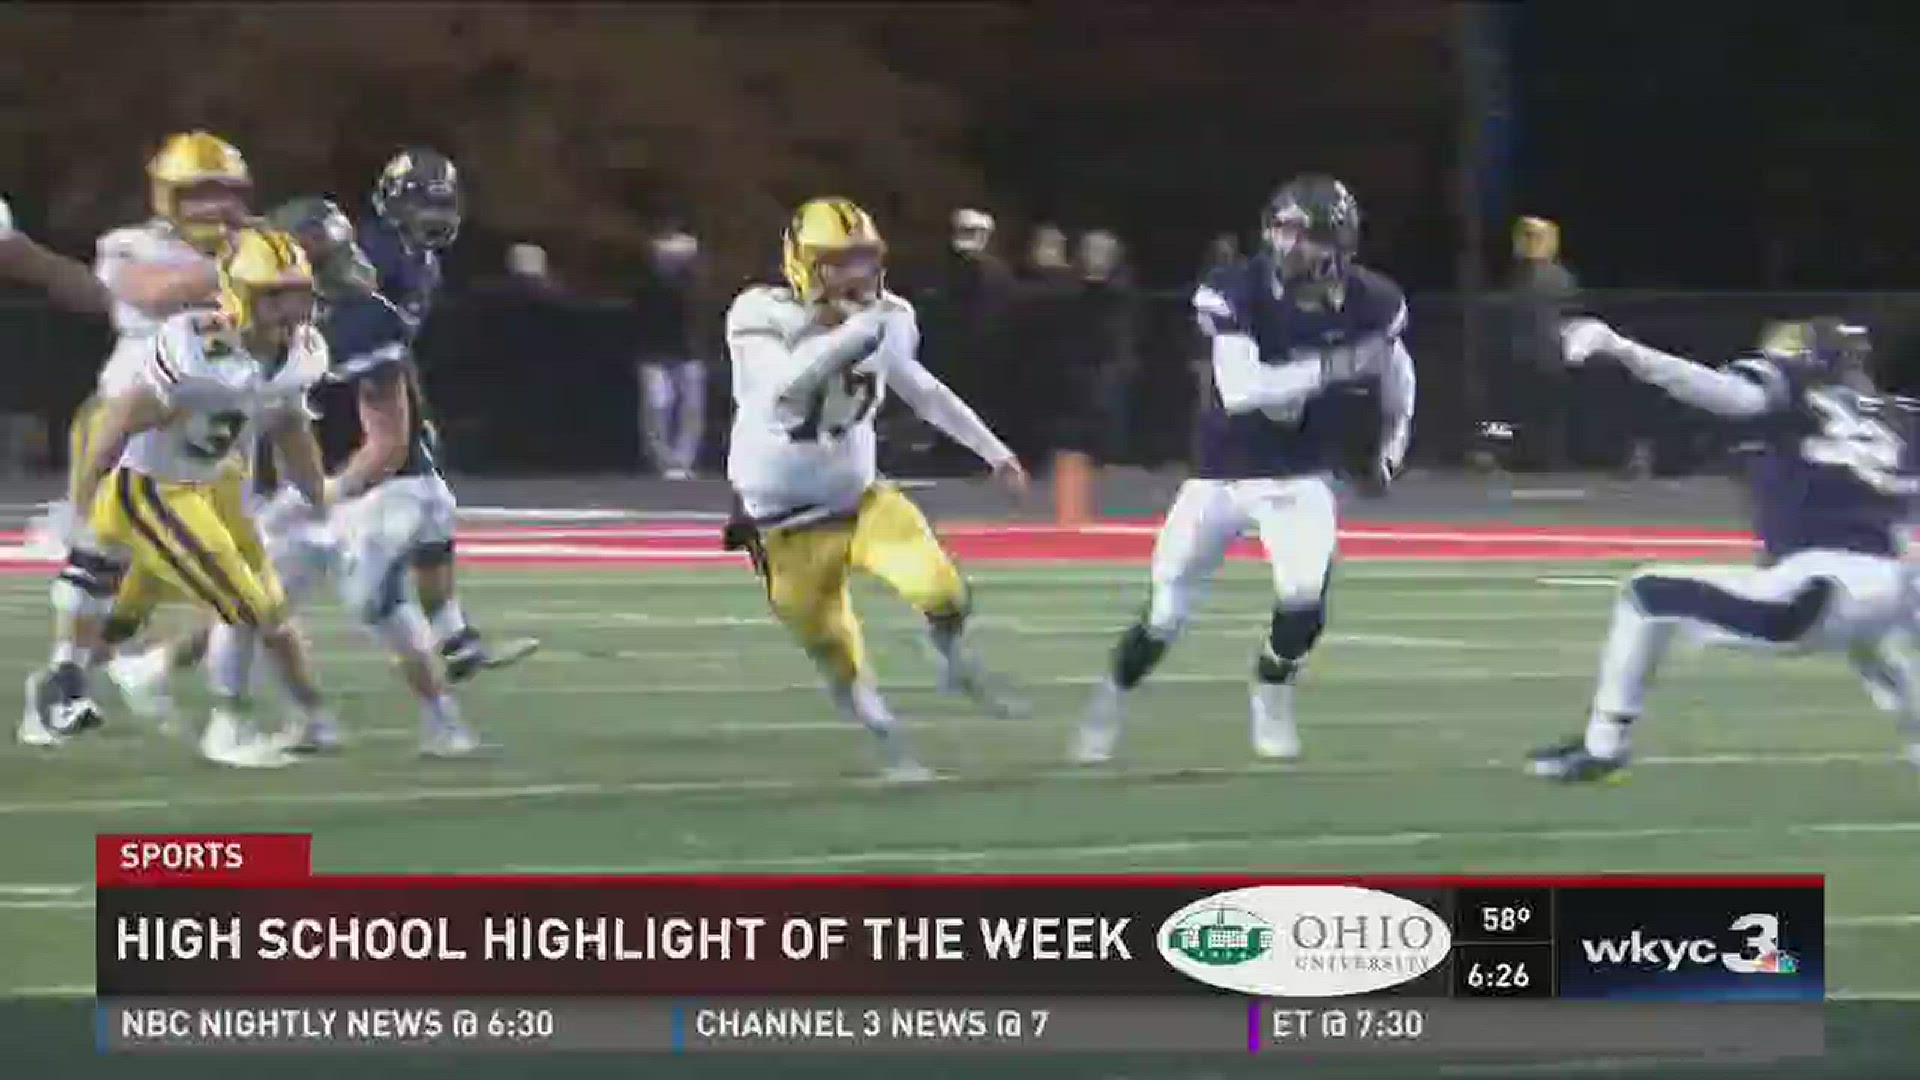 WKYC's Ohio University HS Highlight of the Week features several big St. Ignatius offensive plays, as the Wildcats defeated Solon 31-17 in last week's high school football Division I regional semifinal.